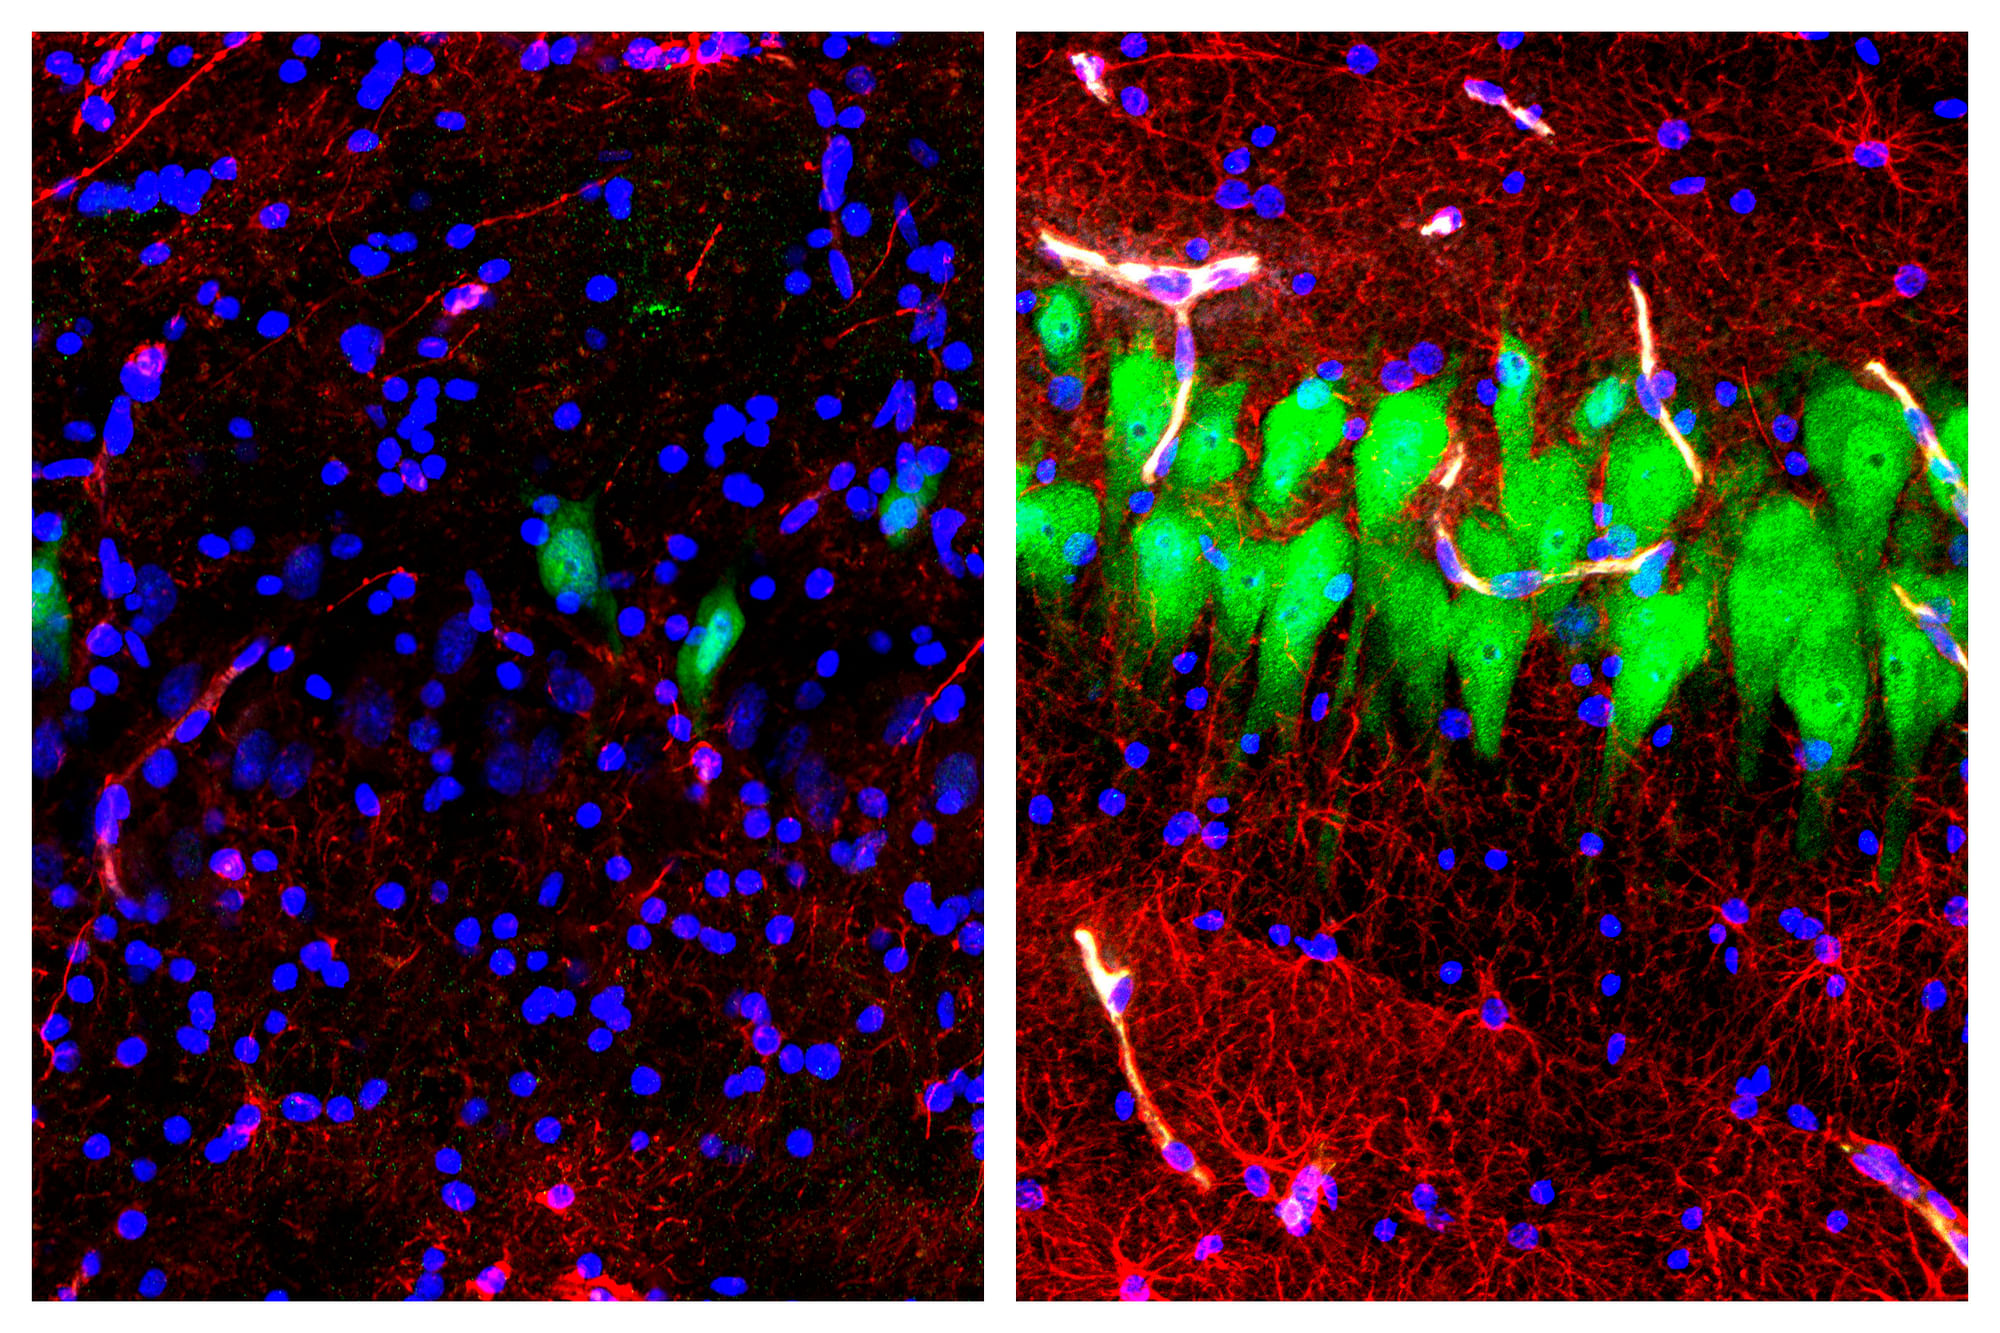 Neurons in a dead brain (L), Neurons after being treated (R).